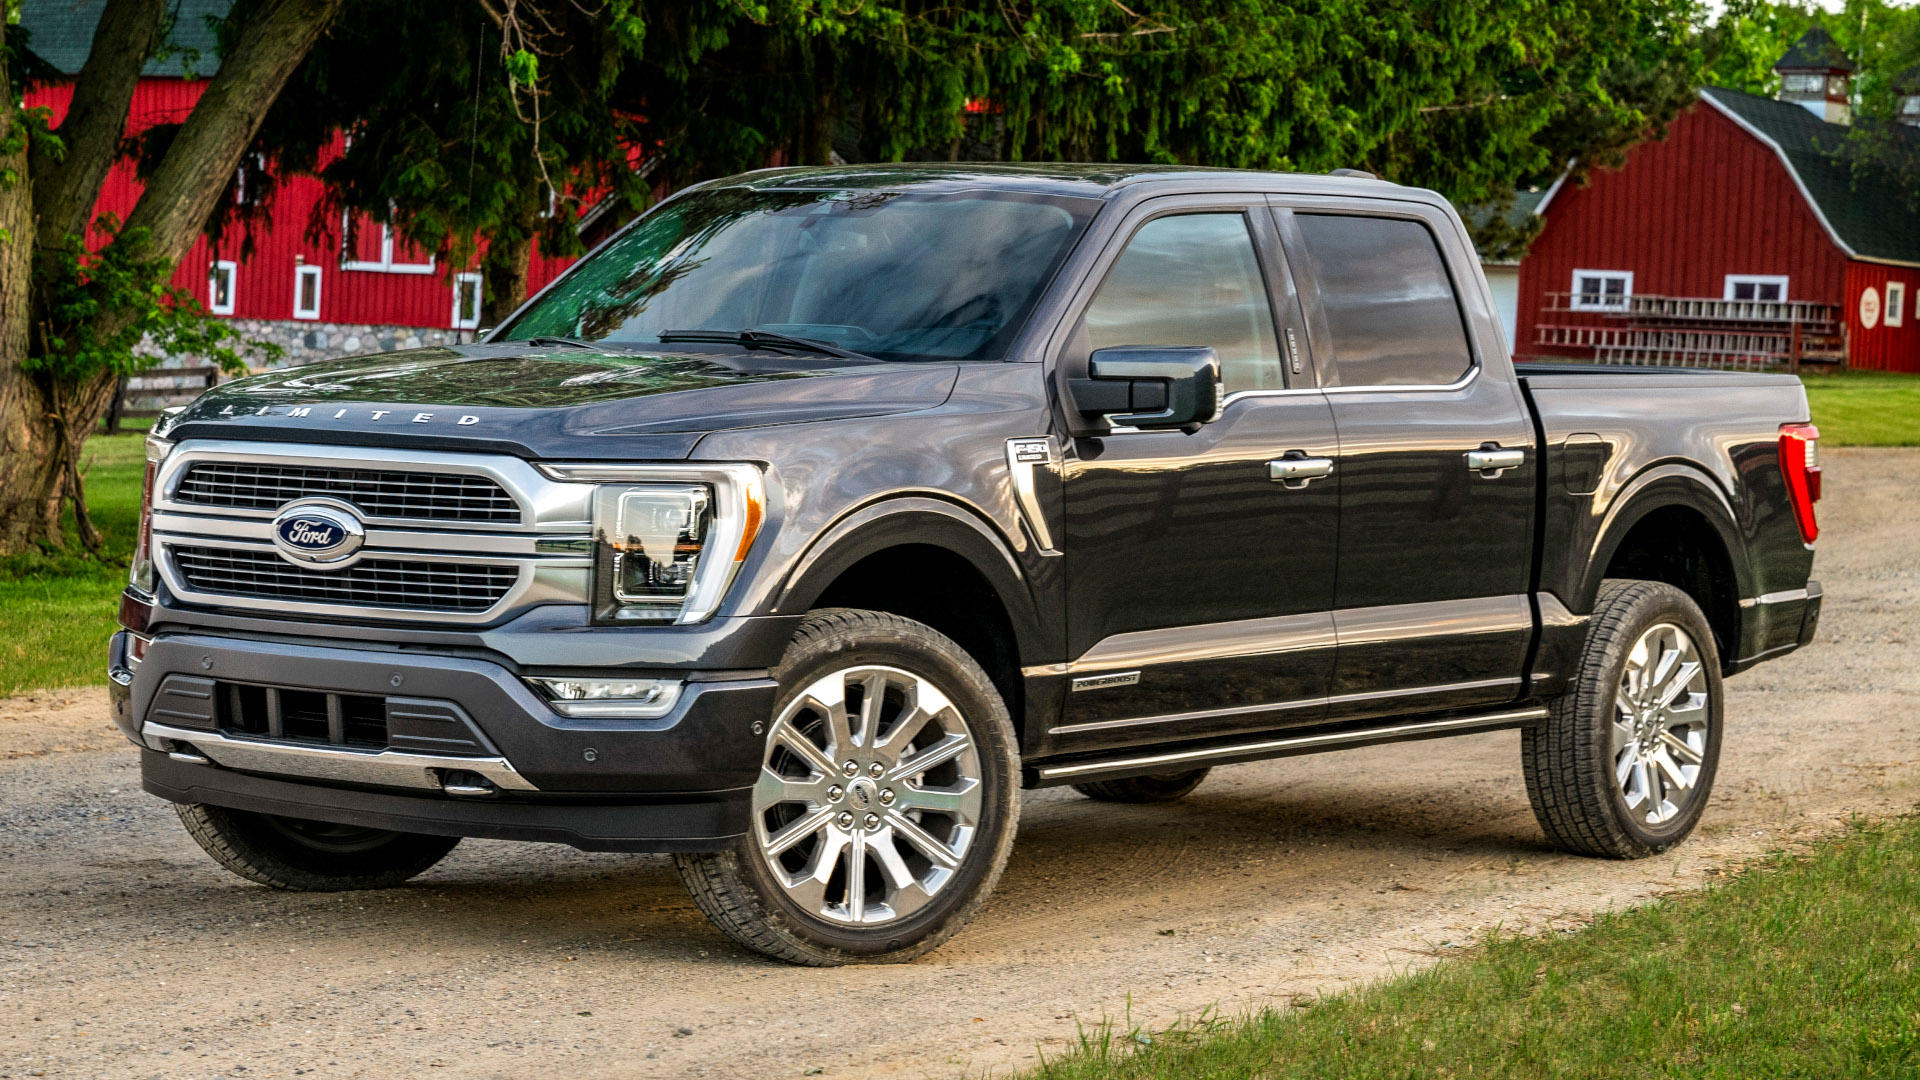 Ford F-150 Owners Startled by ‘Explosive Pops’ and Static Coming From Speakers